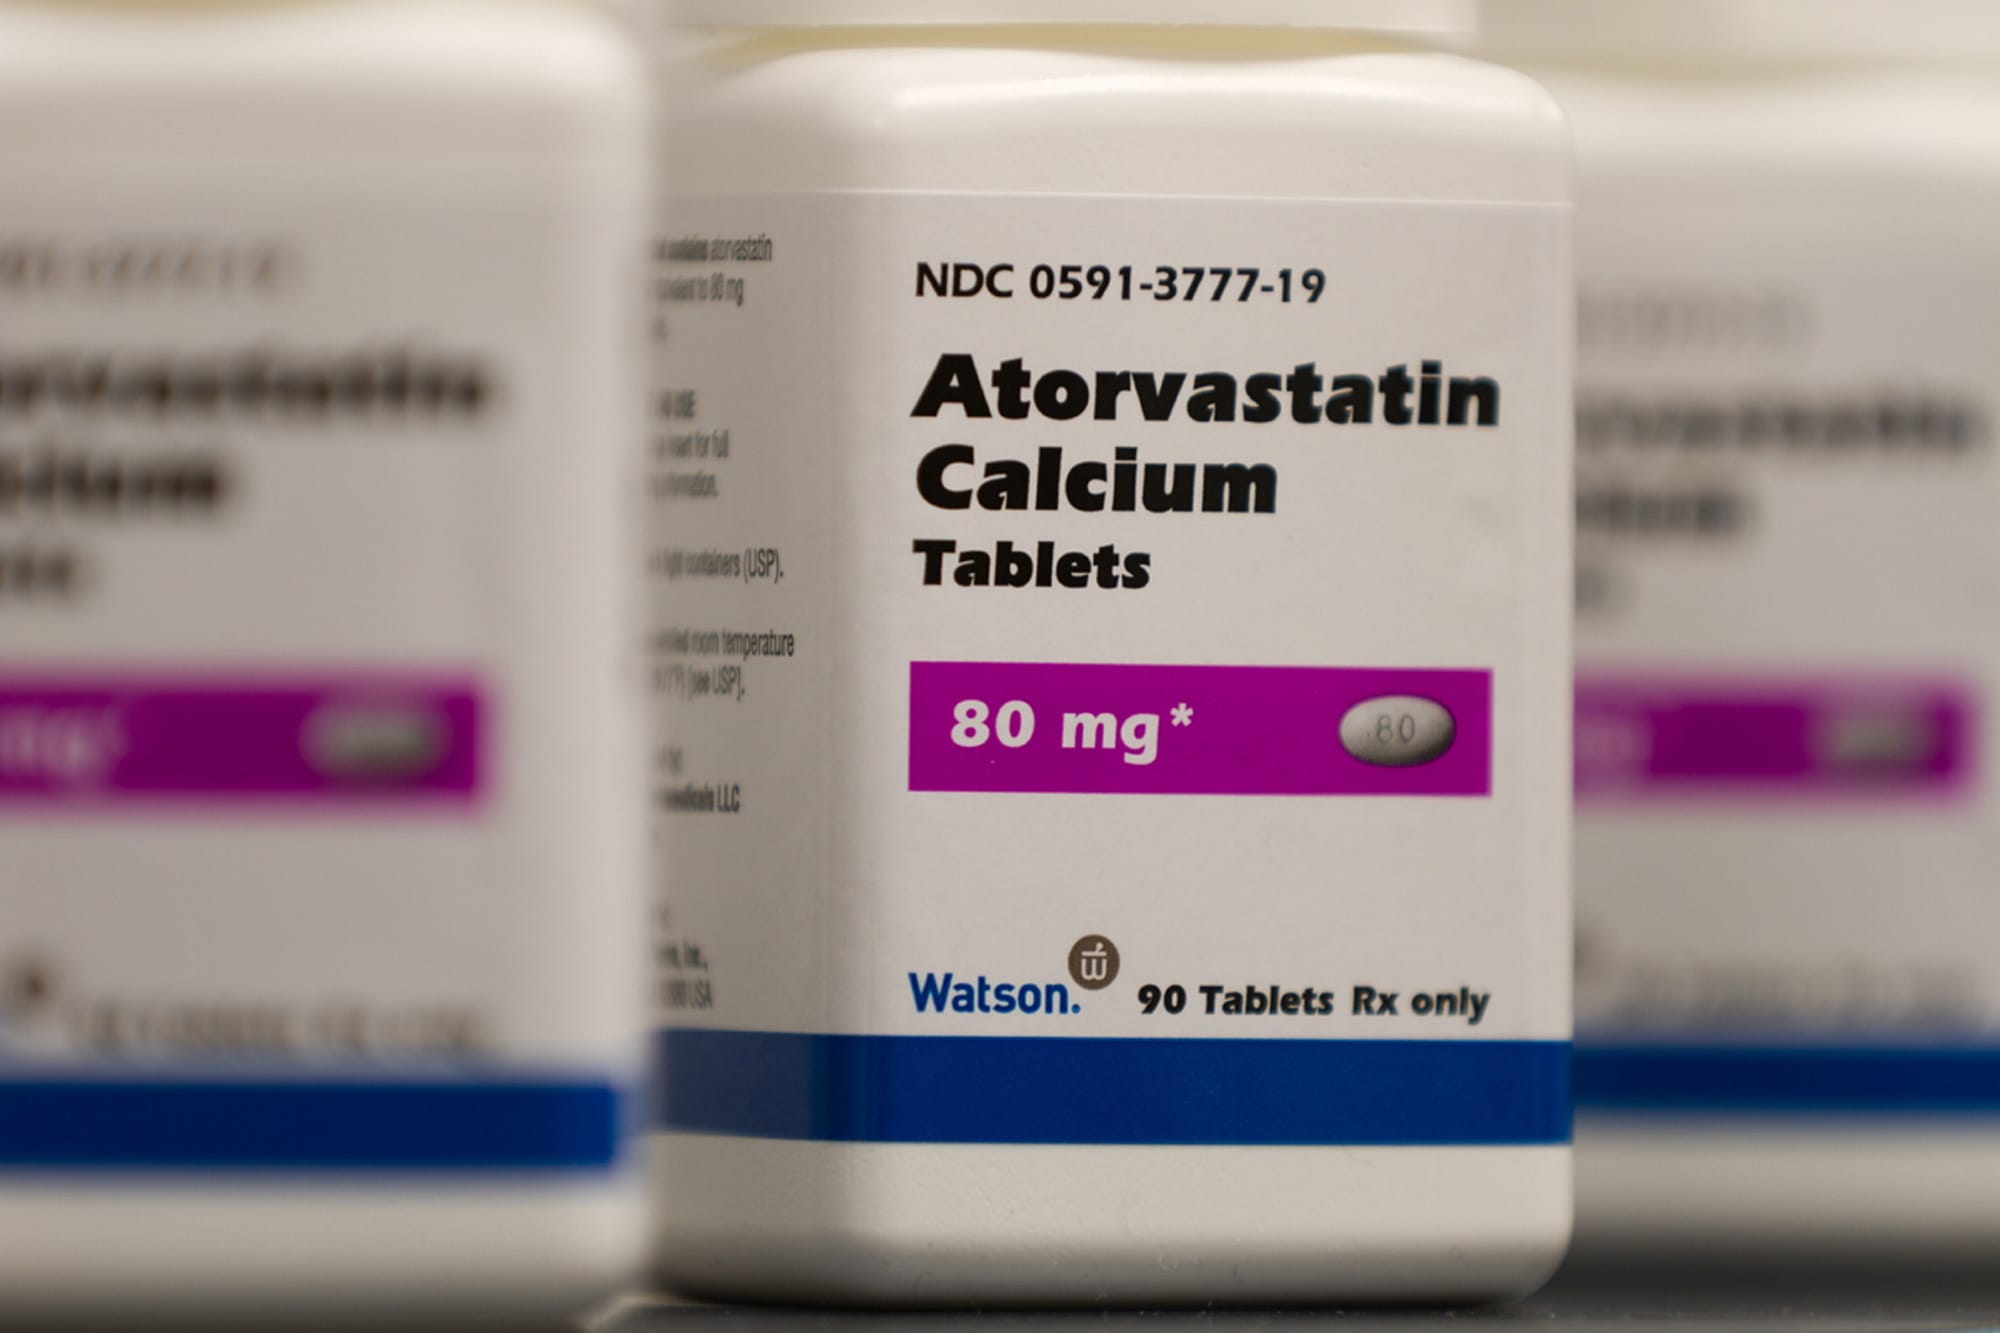 Watson Pharmaceuticals
Atorvastatin calcium tablets are a generic form of Lipitor, a cholesterol-lowering drug.